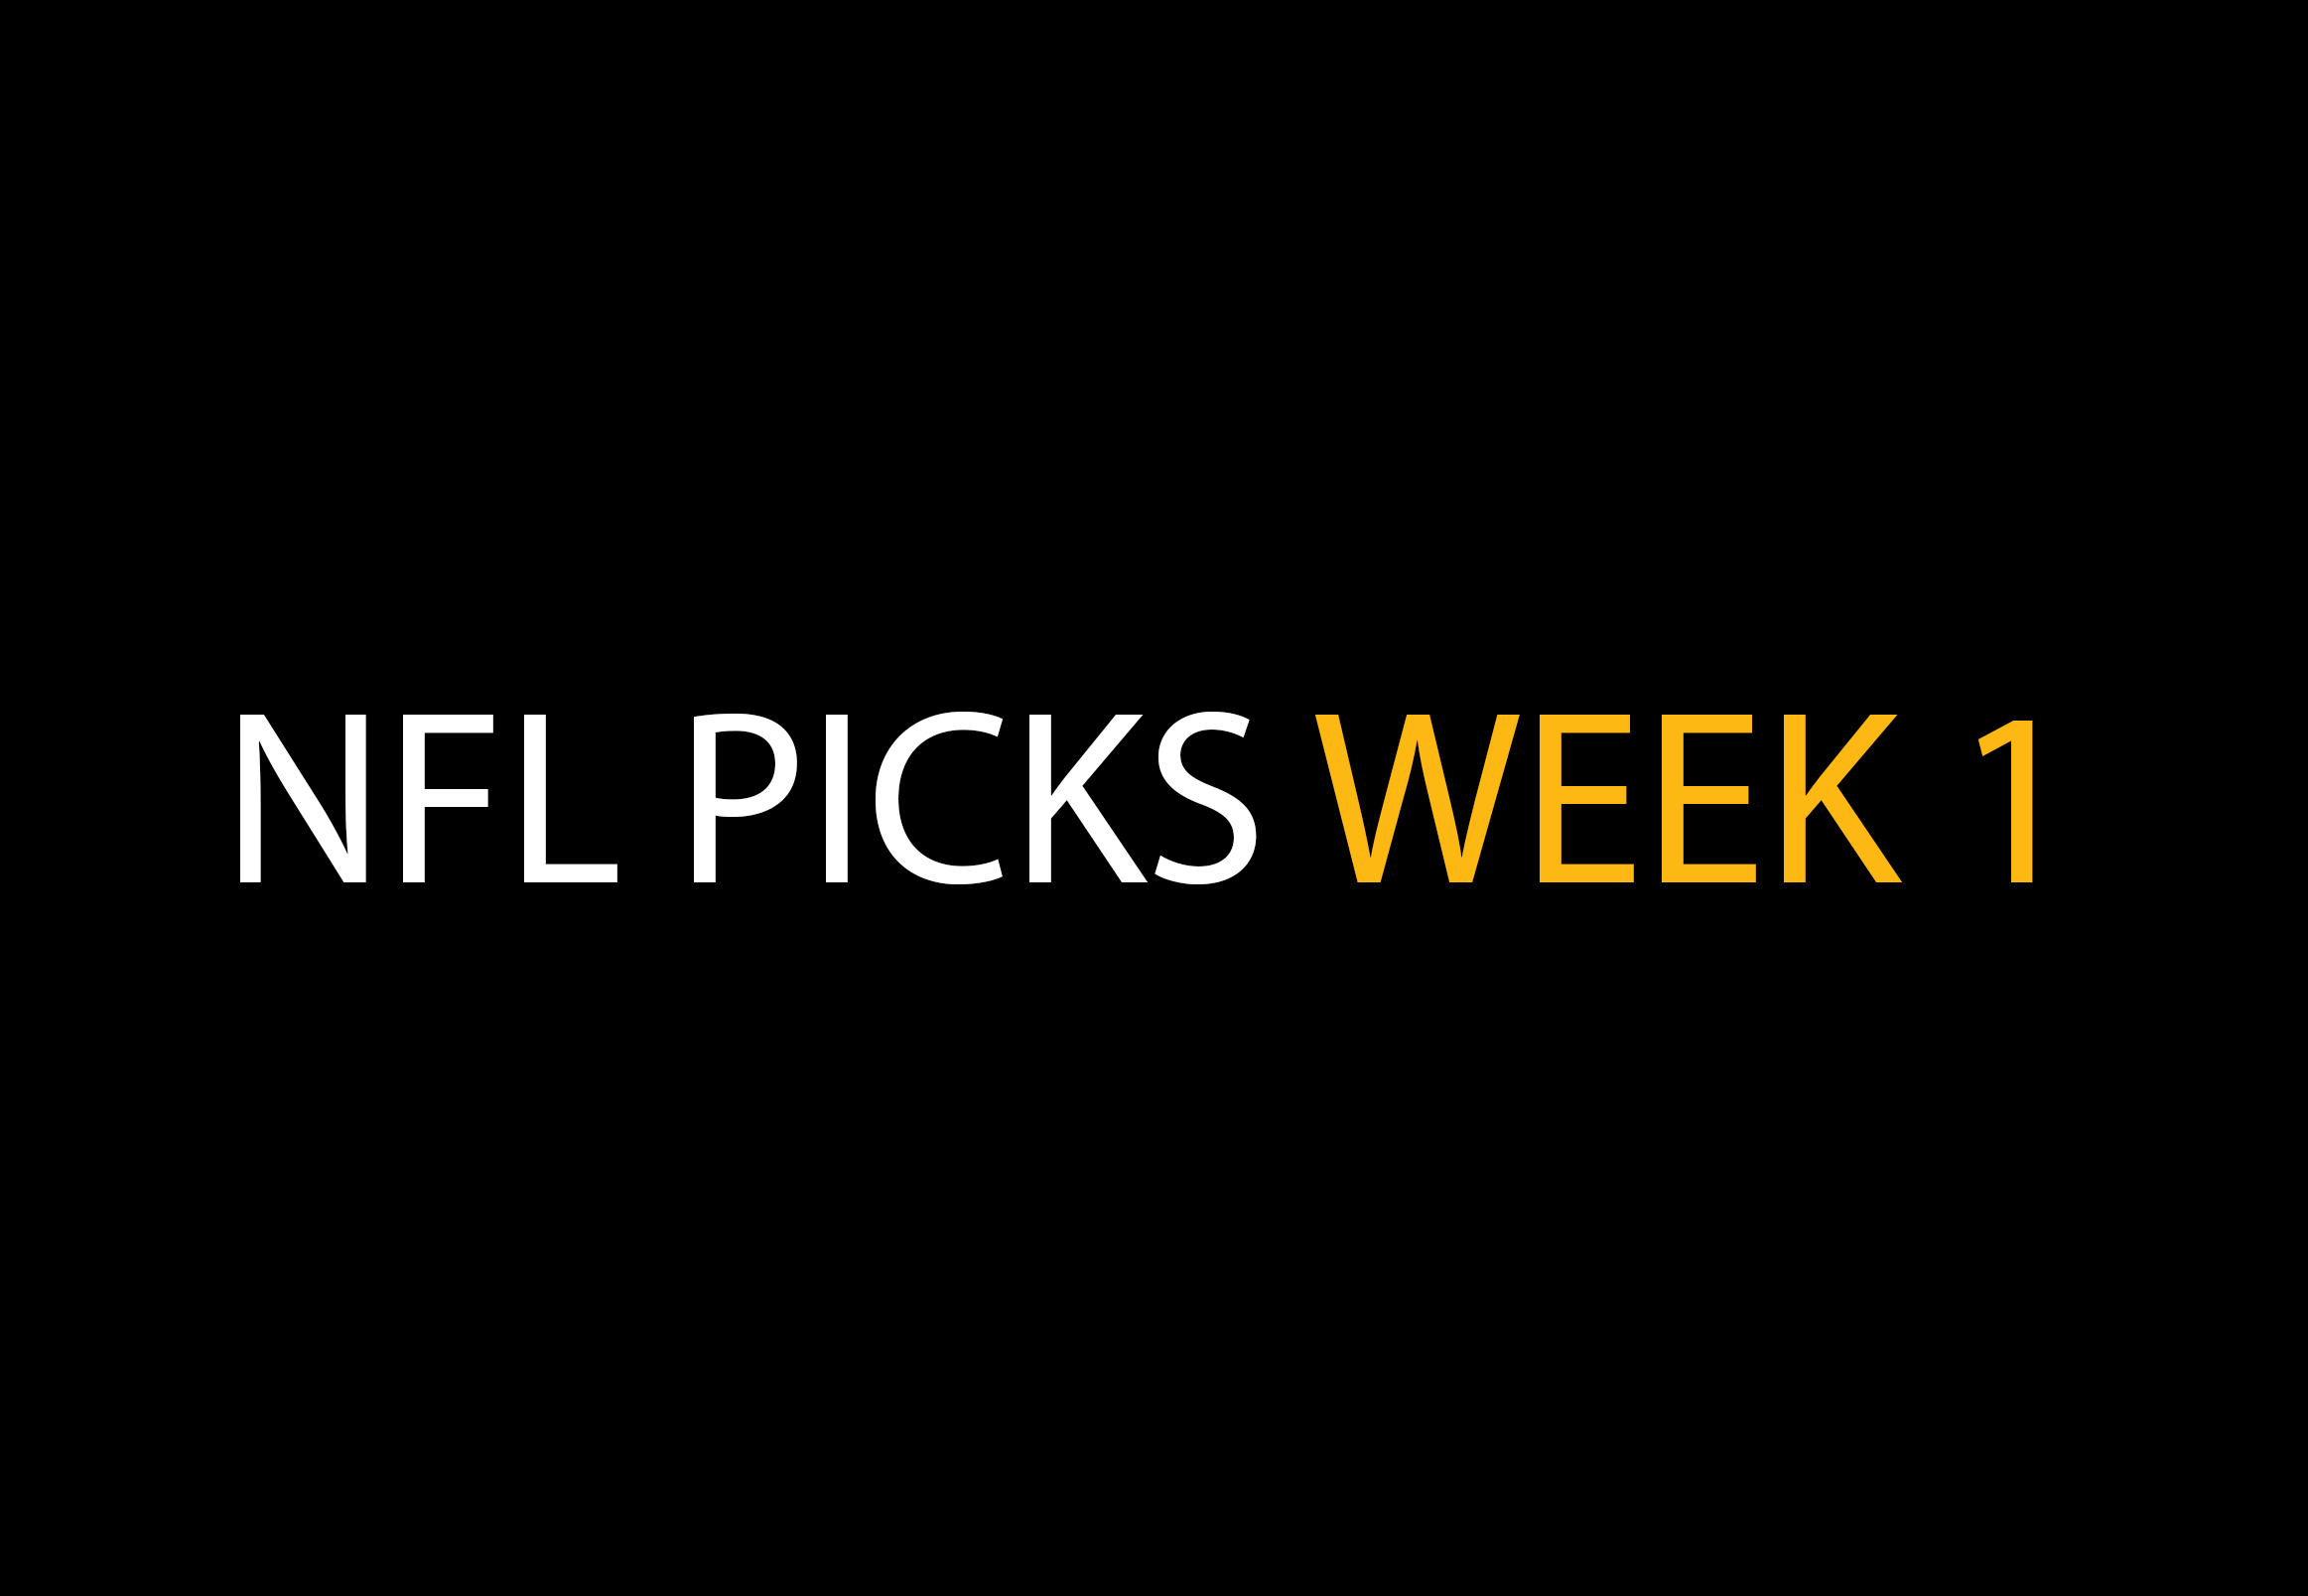 NFL Picks Week 1 - Picks, Predictions and Against the Spread